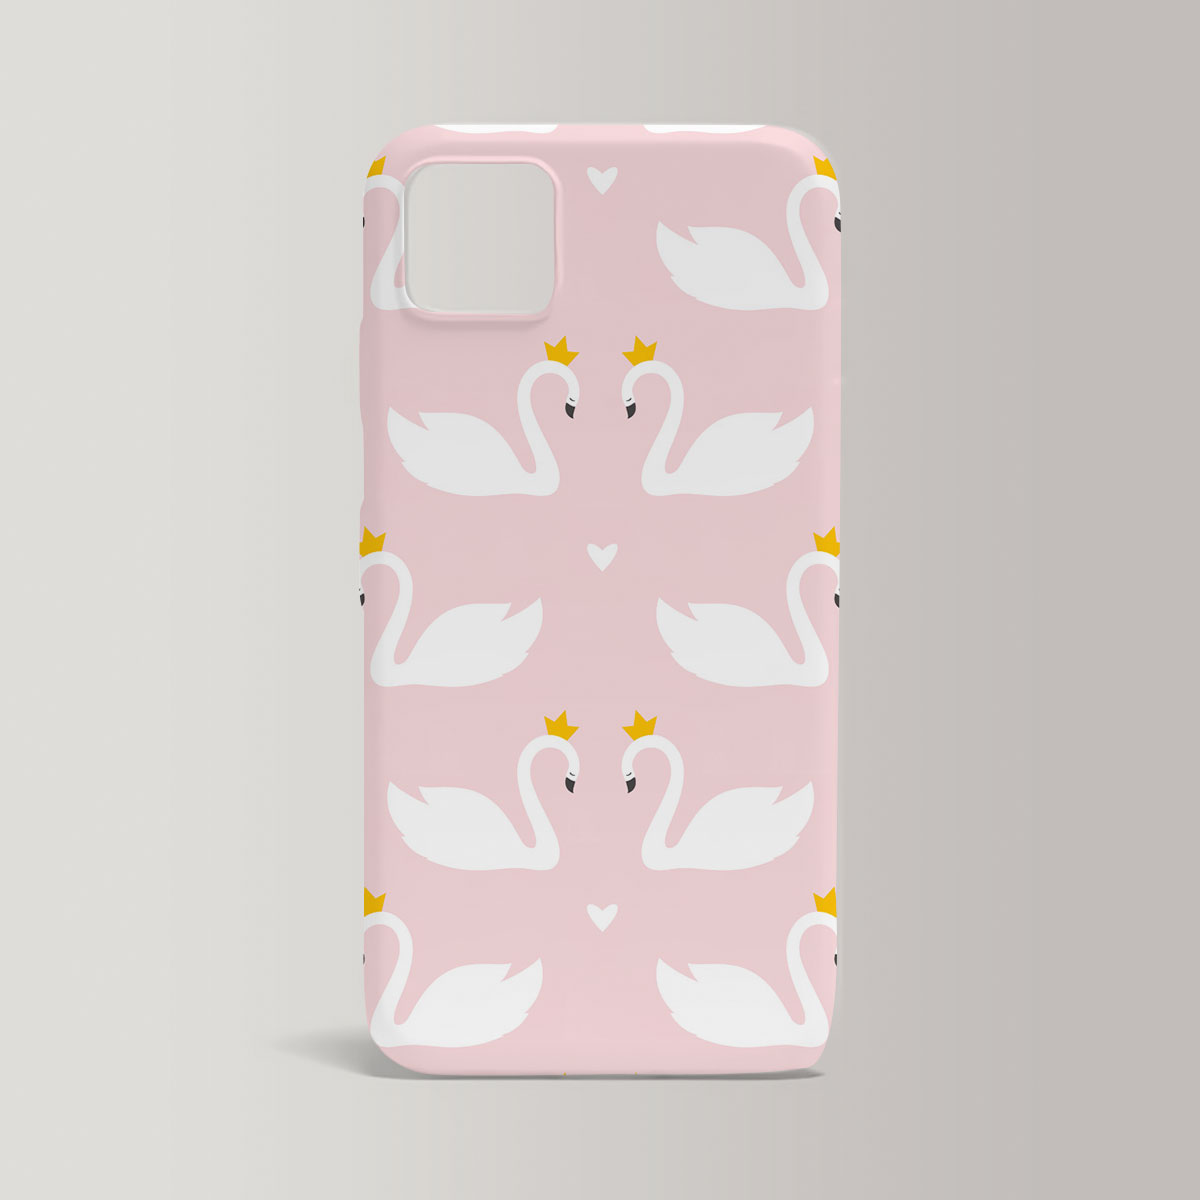 Royal Swan Couple Iphone Case